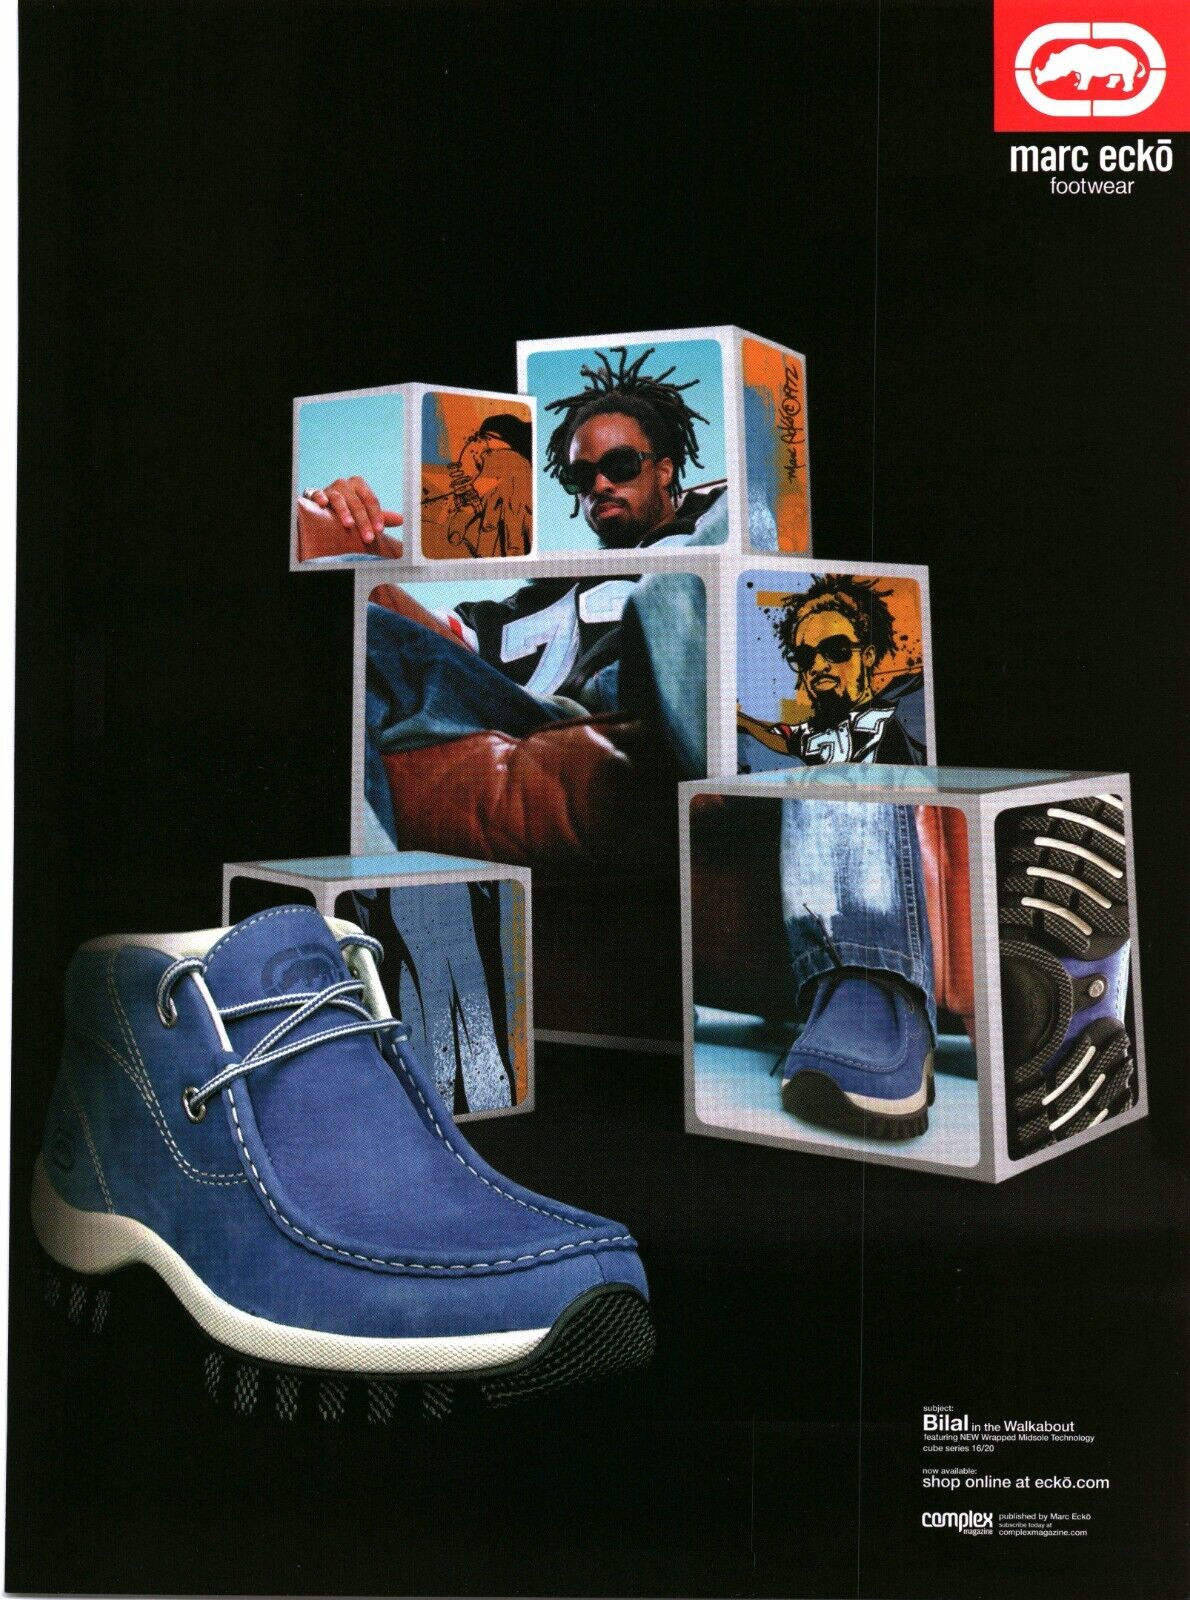 2002 VINTAGE PRINT AD - MARC ECKO FOOTWEAR AD - BILAL IN THE WALKABOUT AD ONLY